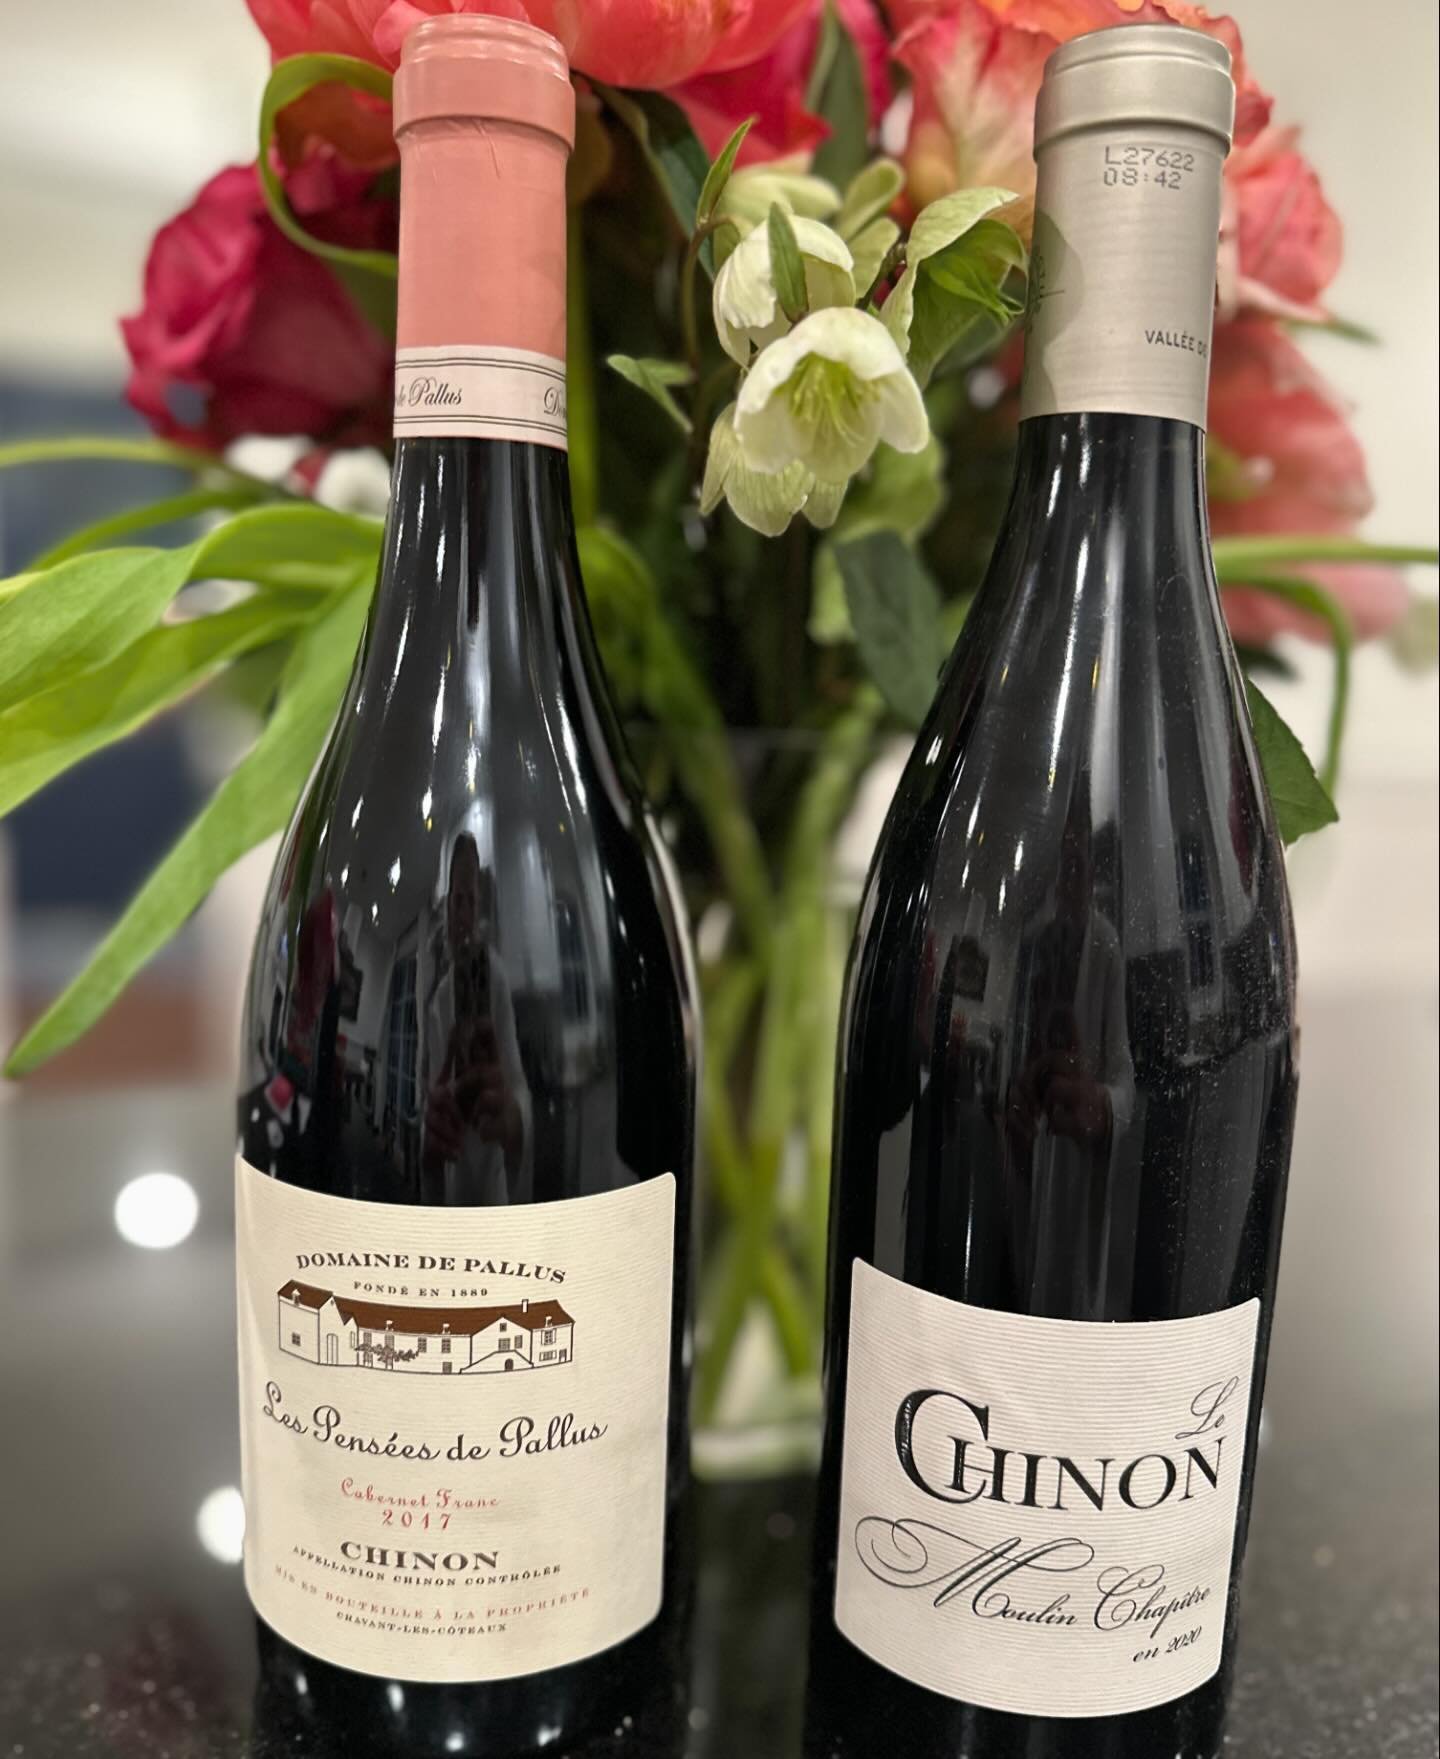 Say Oui! To Chi(non)!🍷🍷

These two Chinons are absolutely terrific and are both under $30. One of them is under $20 (see below). These are perfect red wines for spring and pair beautifully with meats when a Cabernet Sauvignon, Merlot, or Syrah feel